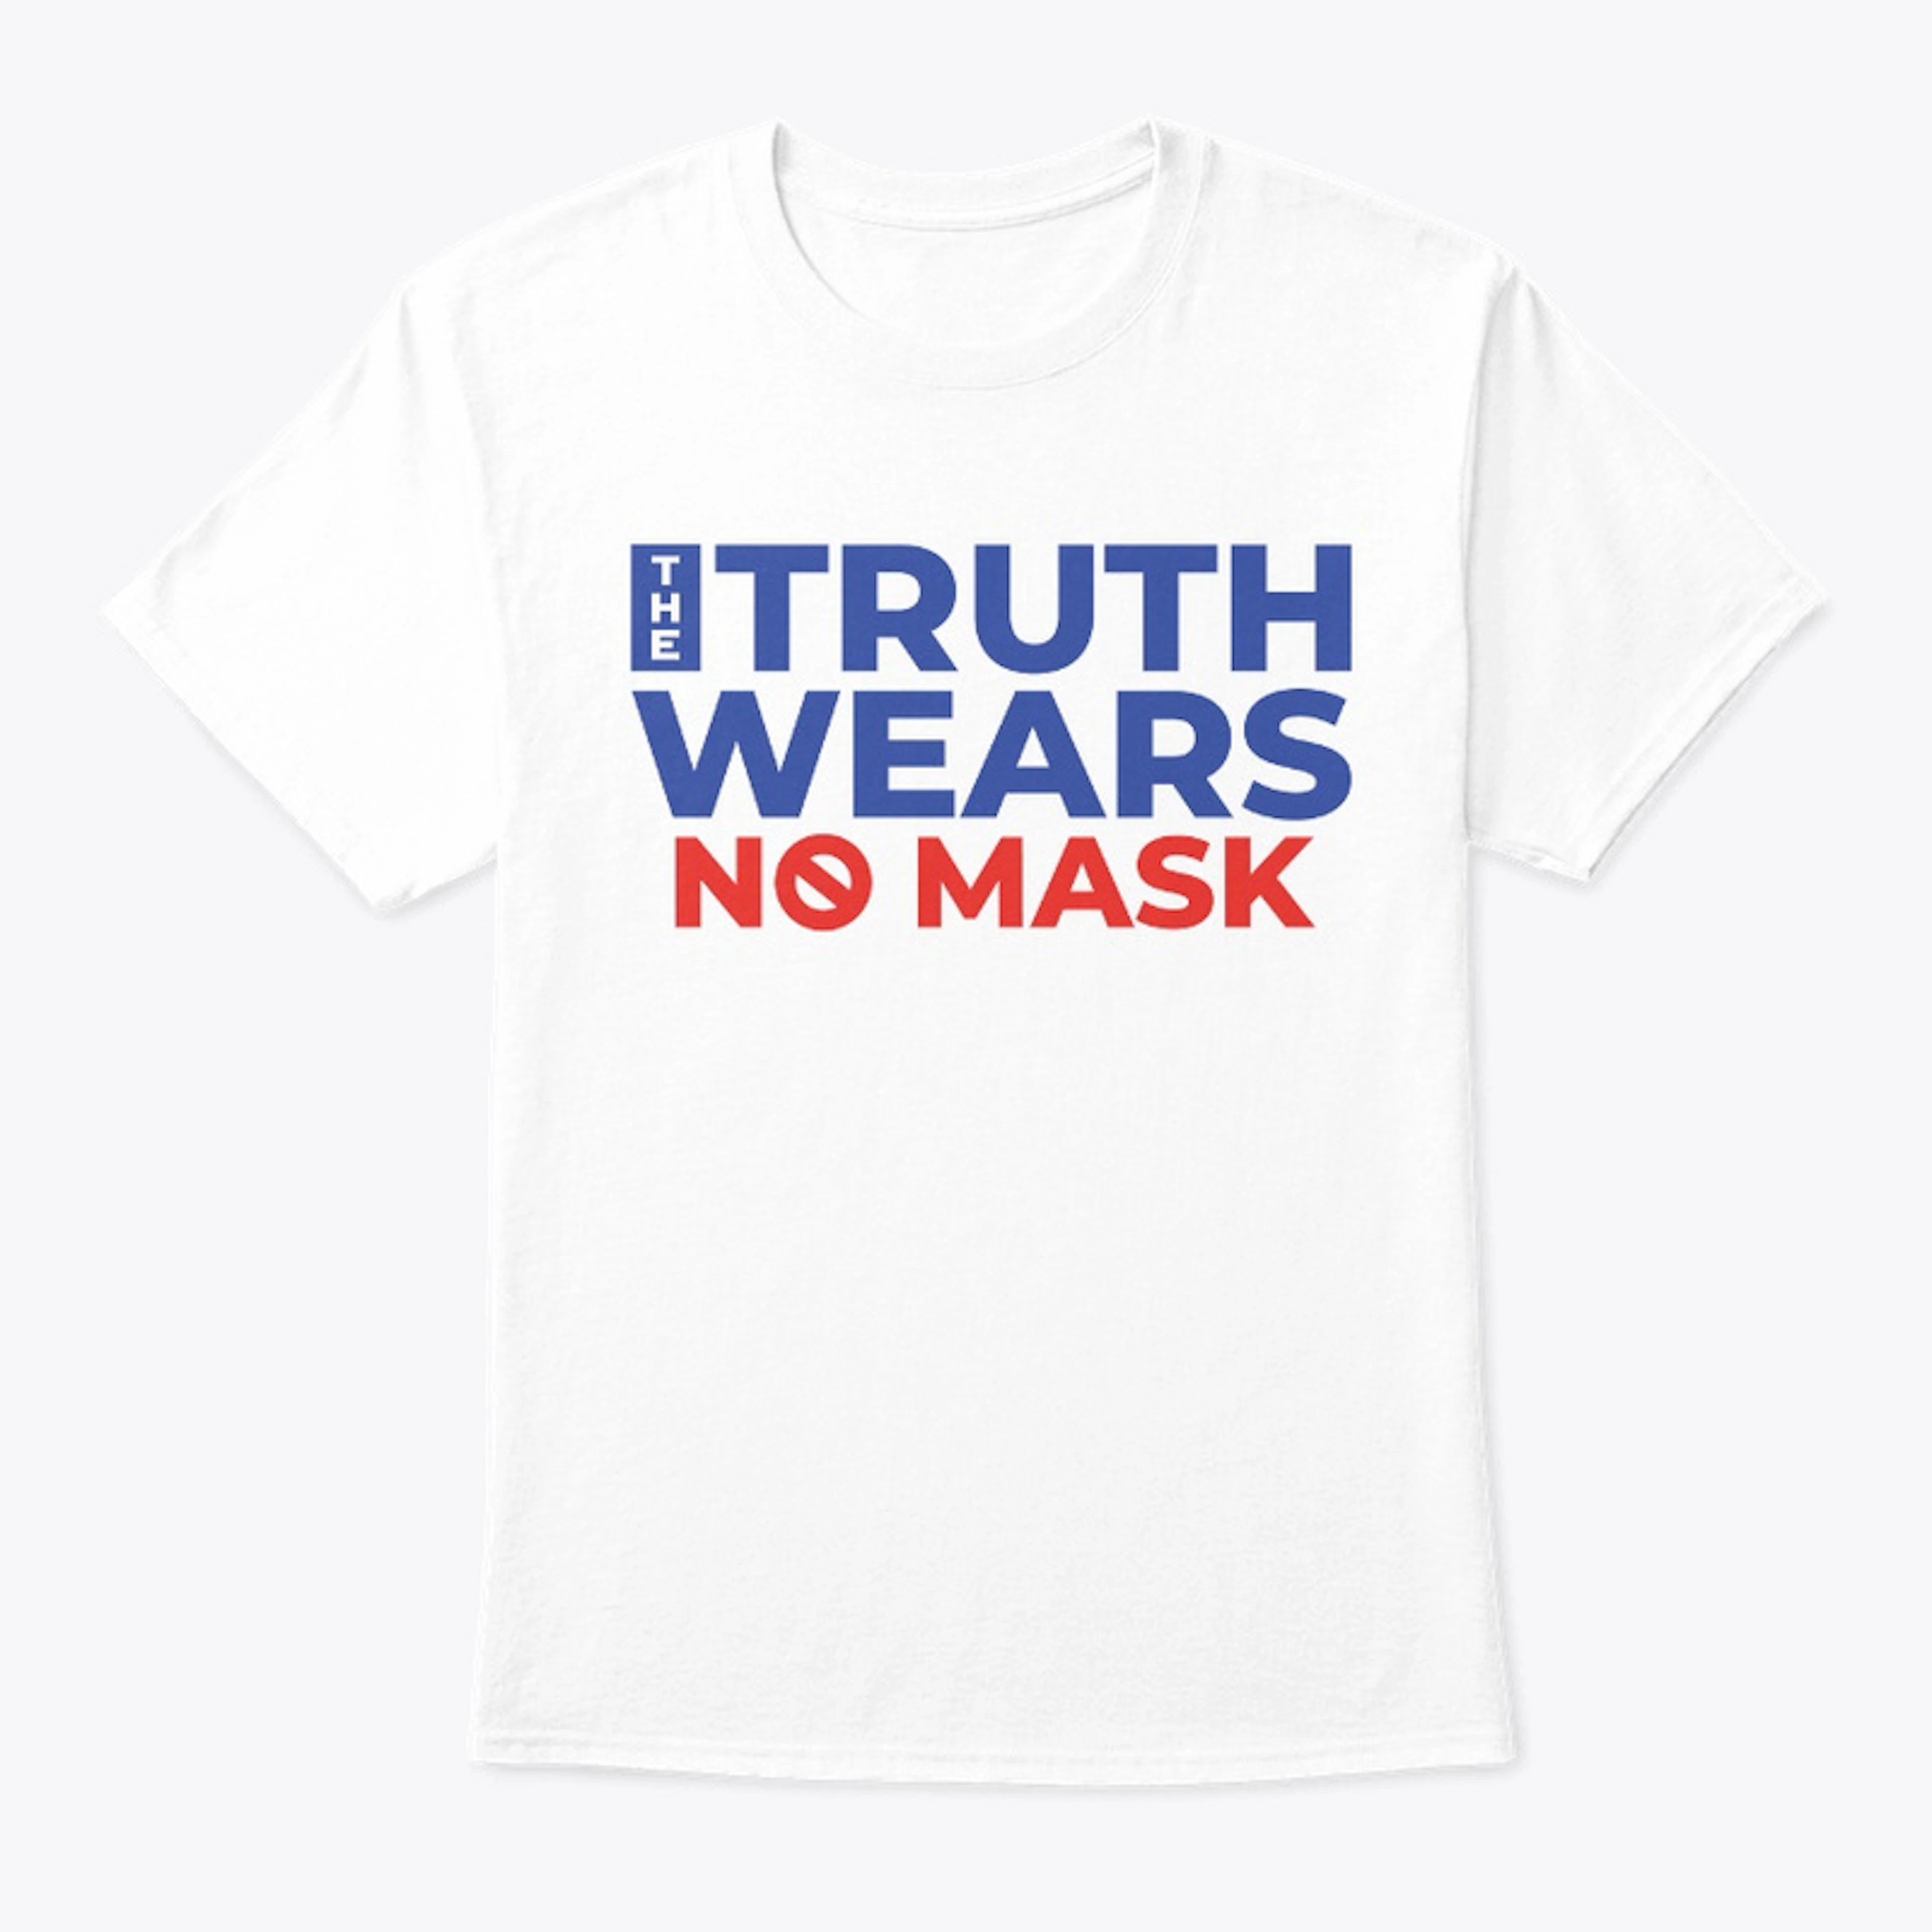 The Truth Wears No Mask